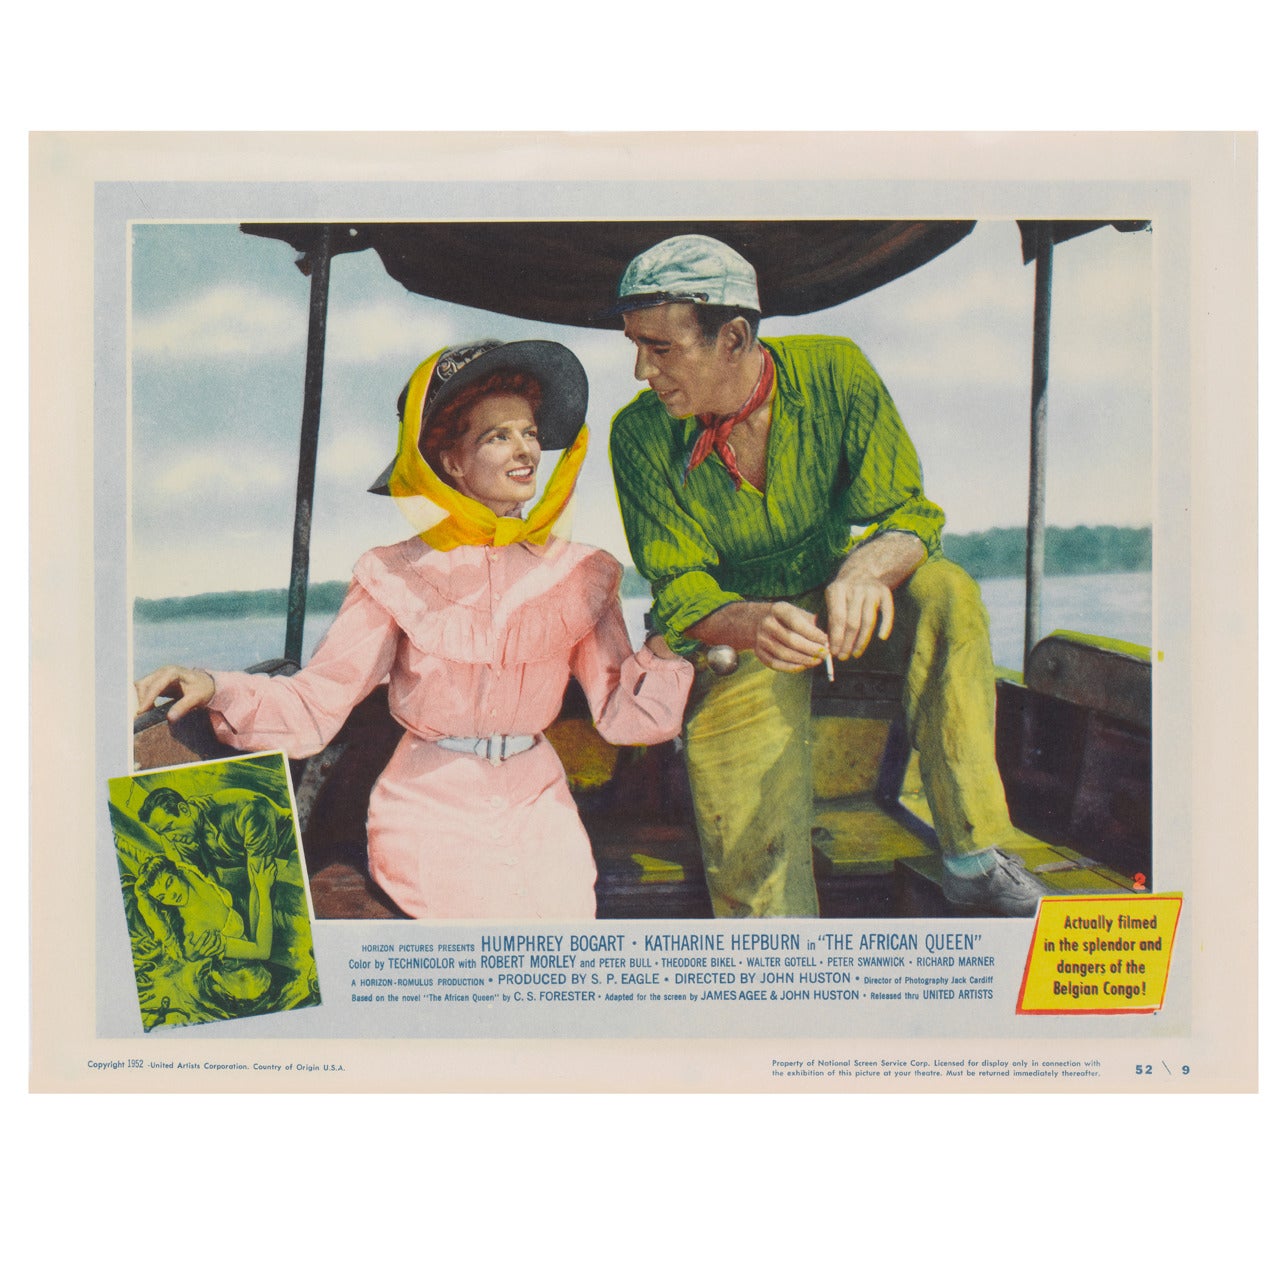 Original US Lobby card. This was part of a set of eight cards that were used in American cinemas to advertise the film when it first was released in 195.
This Lobby card is the best card in the set showing Humphrey Bogart, Katherine Hepburn sitting